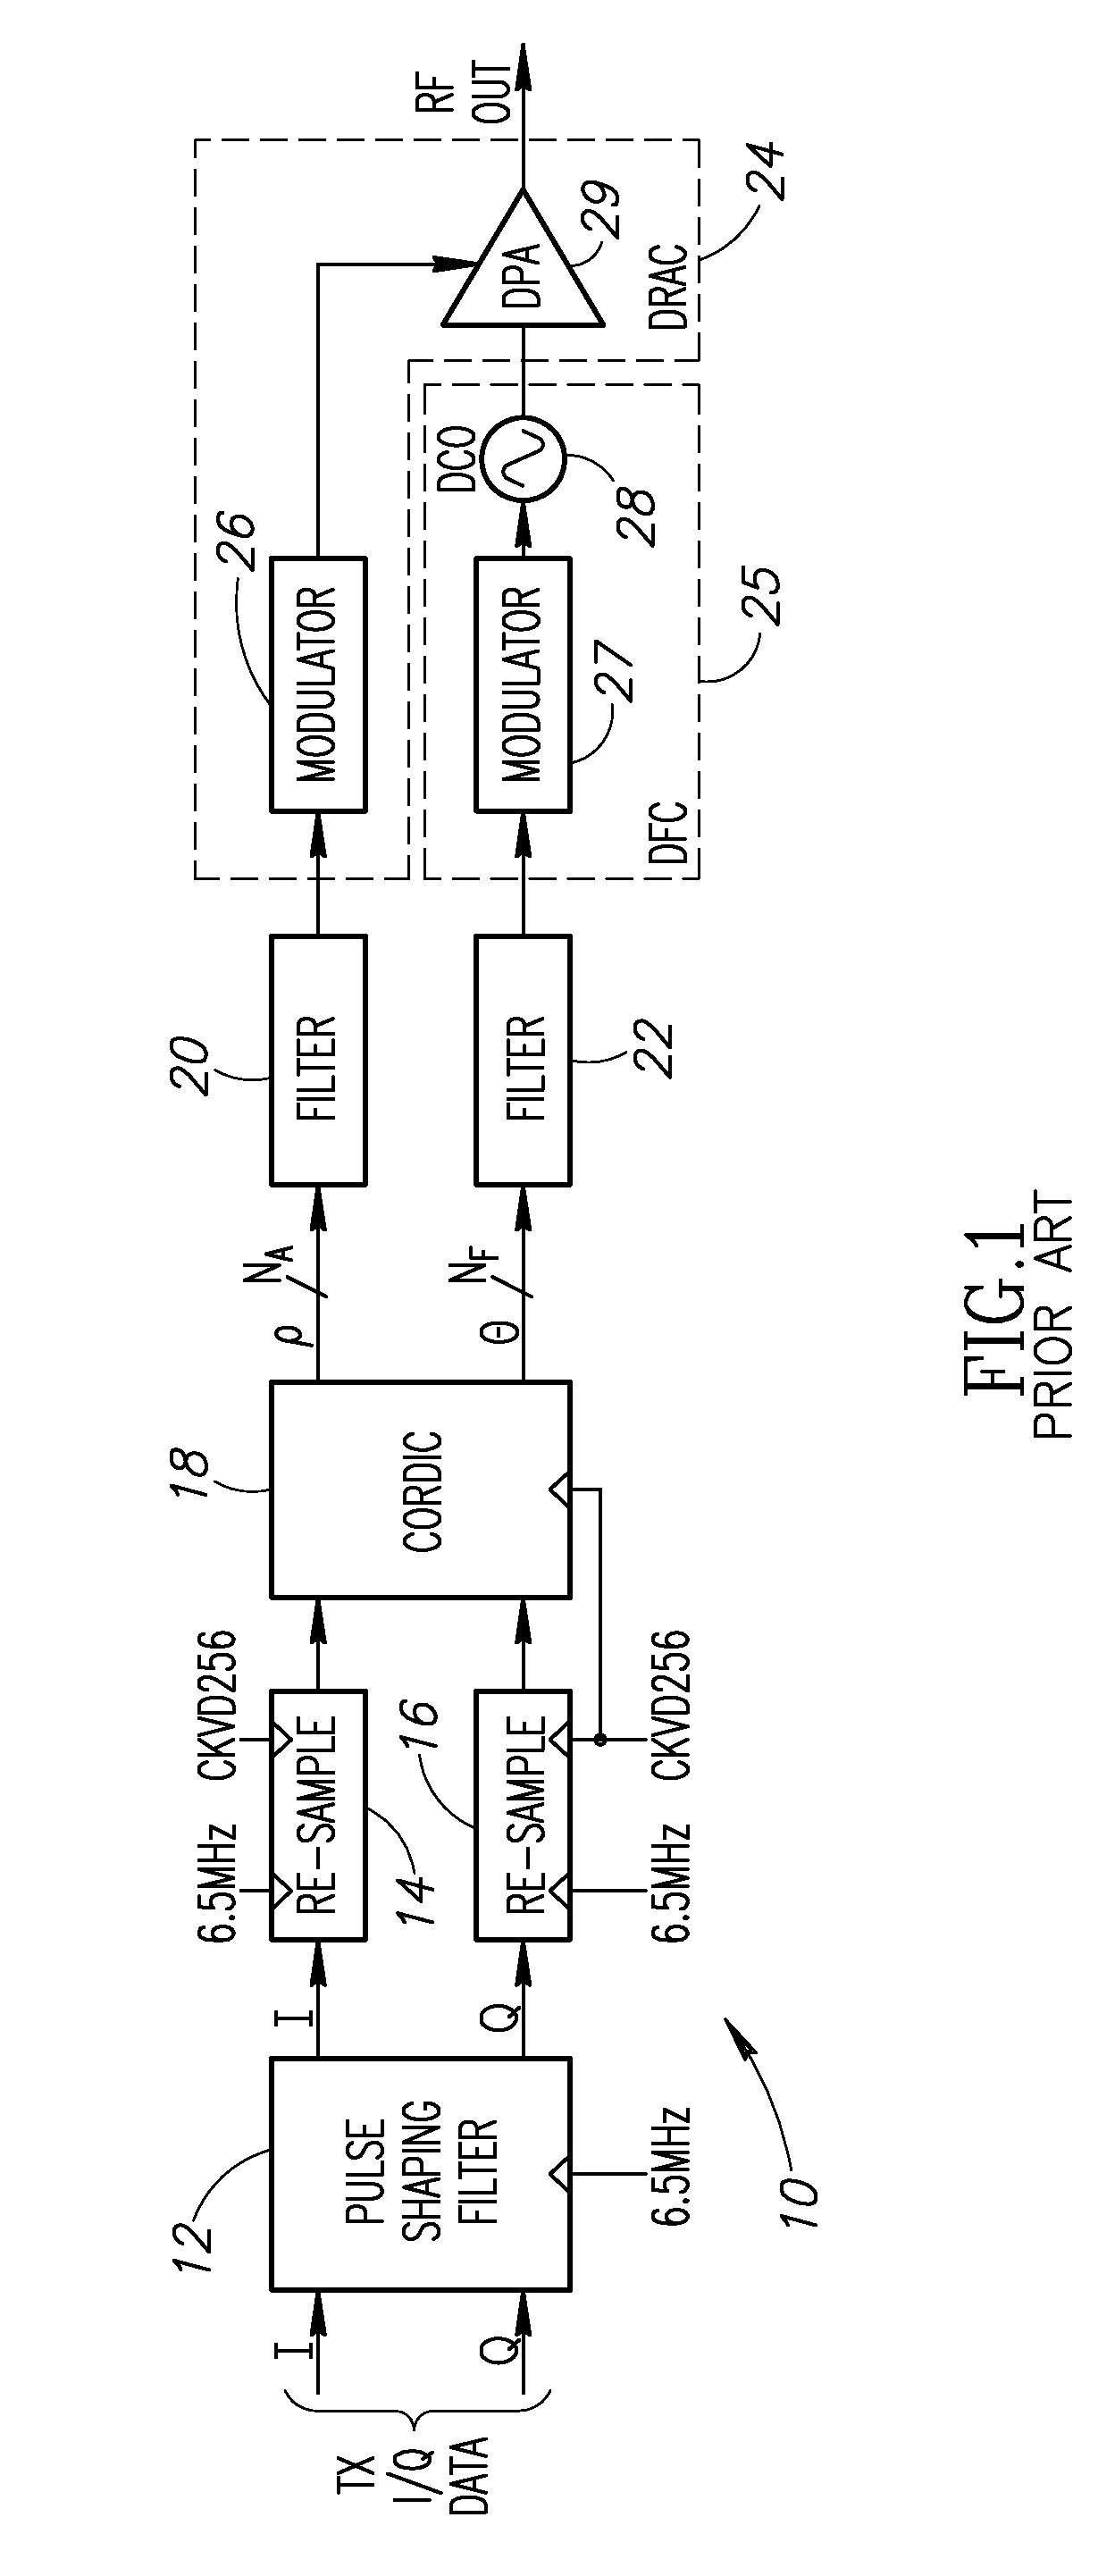 Upsampling/interpolation and time alignment mechanism utilizing injection of high frequency noise